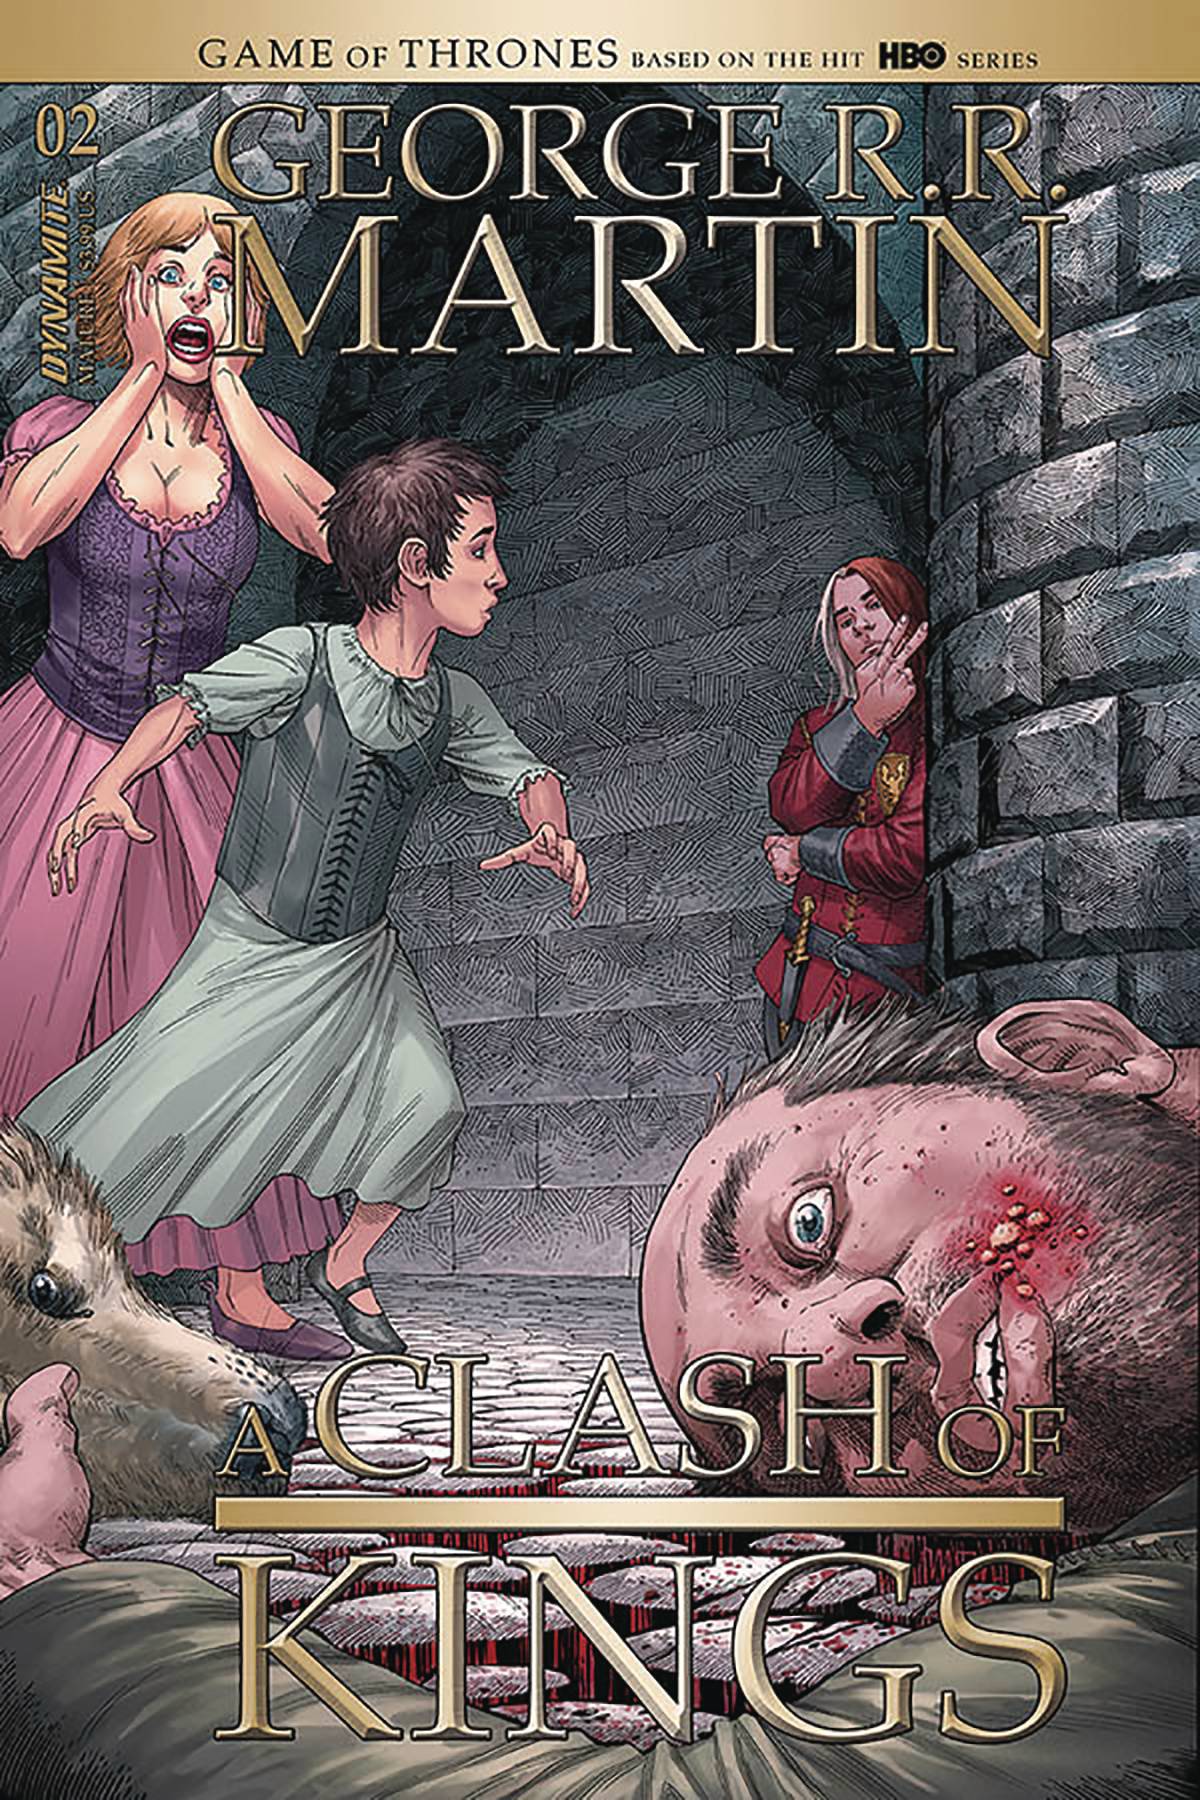 A Clash of Kings: the Graphic Novel: Volume Two by George R.R. Martin,  Hardcover